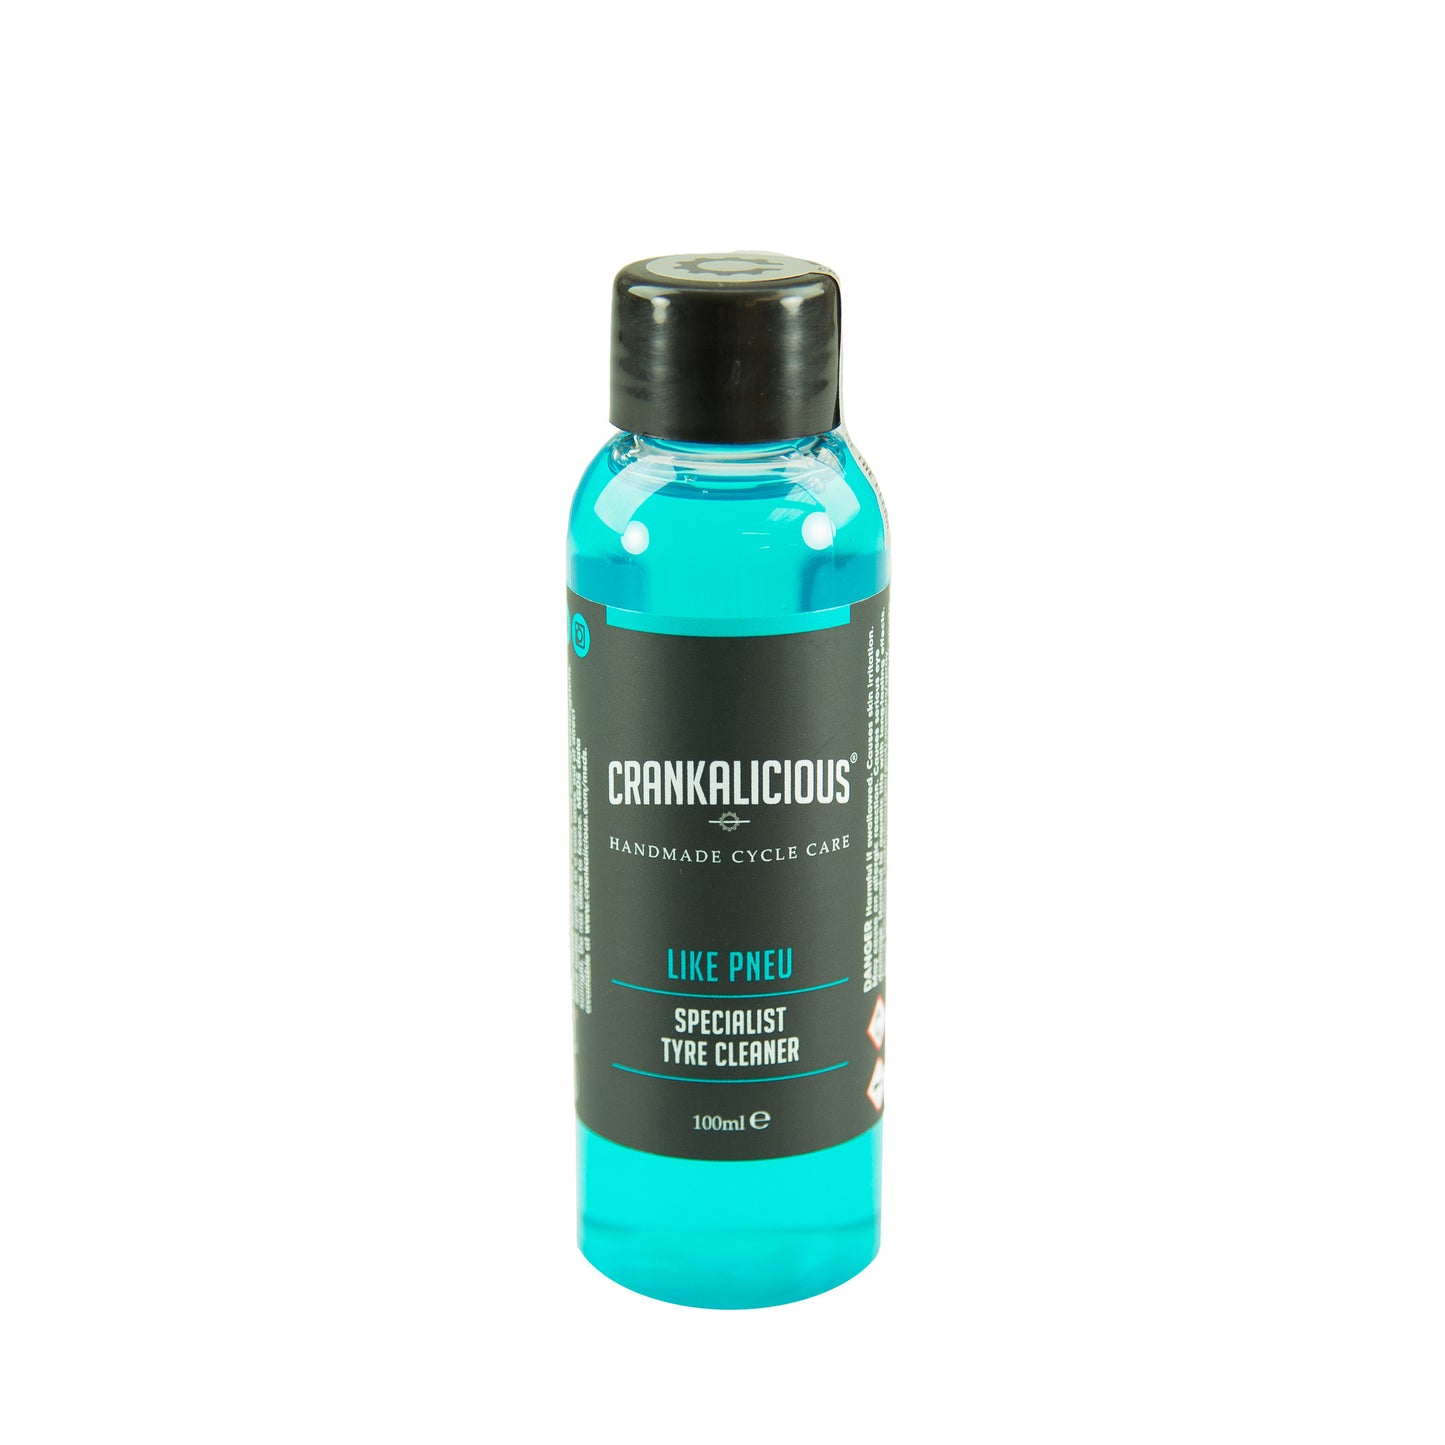 Like Pneu tyre cleaner, Tyre Cleaner - Crankalicious